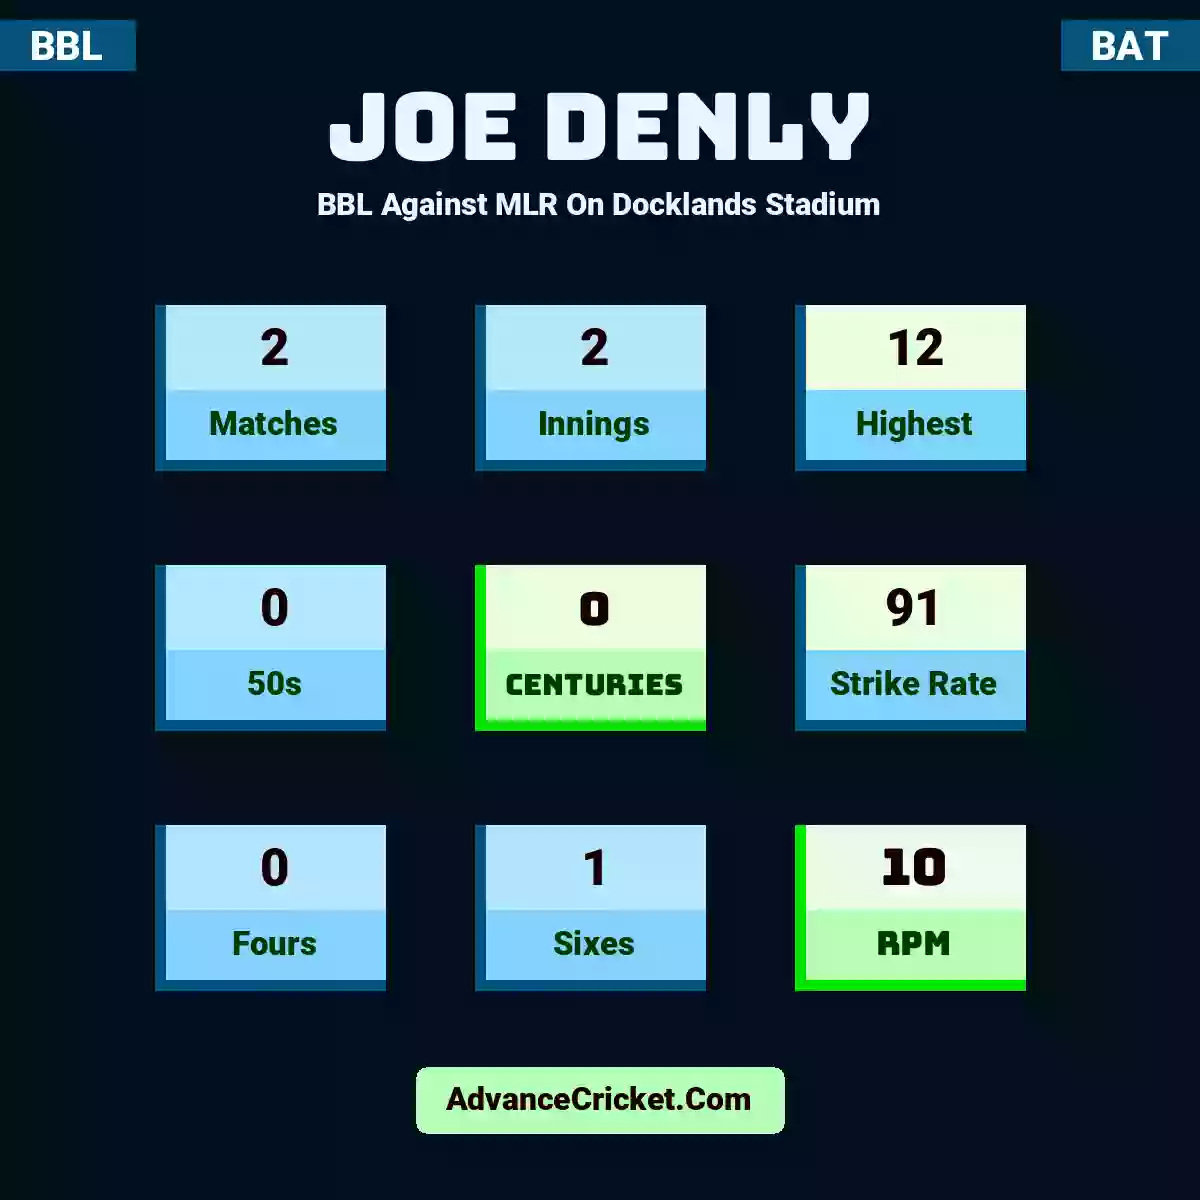 Joe Denly BBL  Against MLR On Docklands Stadium, Joe Denly played 2 matches, scored 12 runs as highest, 0 half-centuries, and 0 centuries, with a strike rate of 91. J.Denly hit 0 fours and 1 sixes, with an RPM of 10.